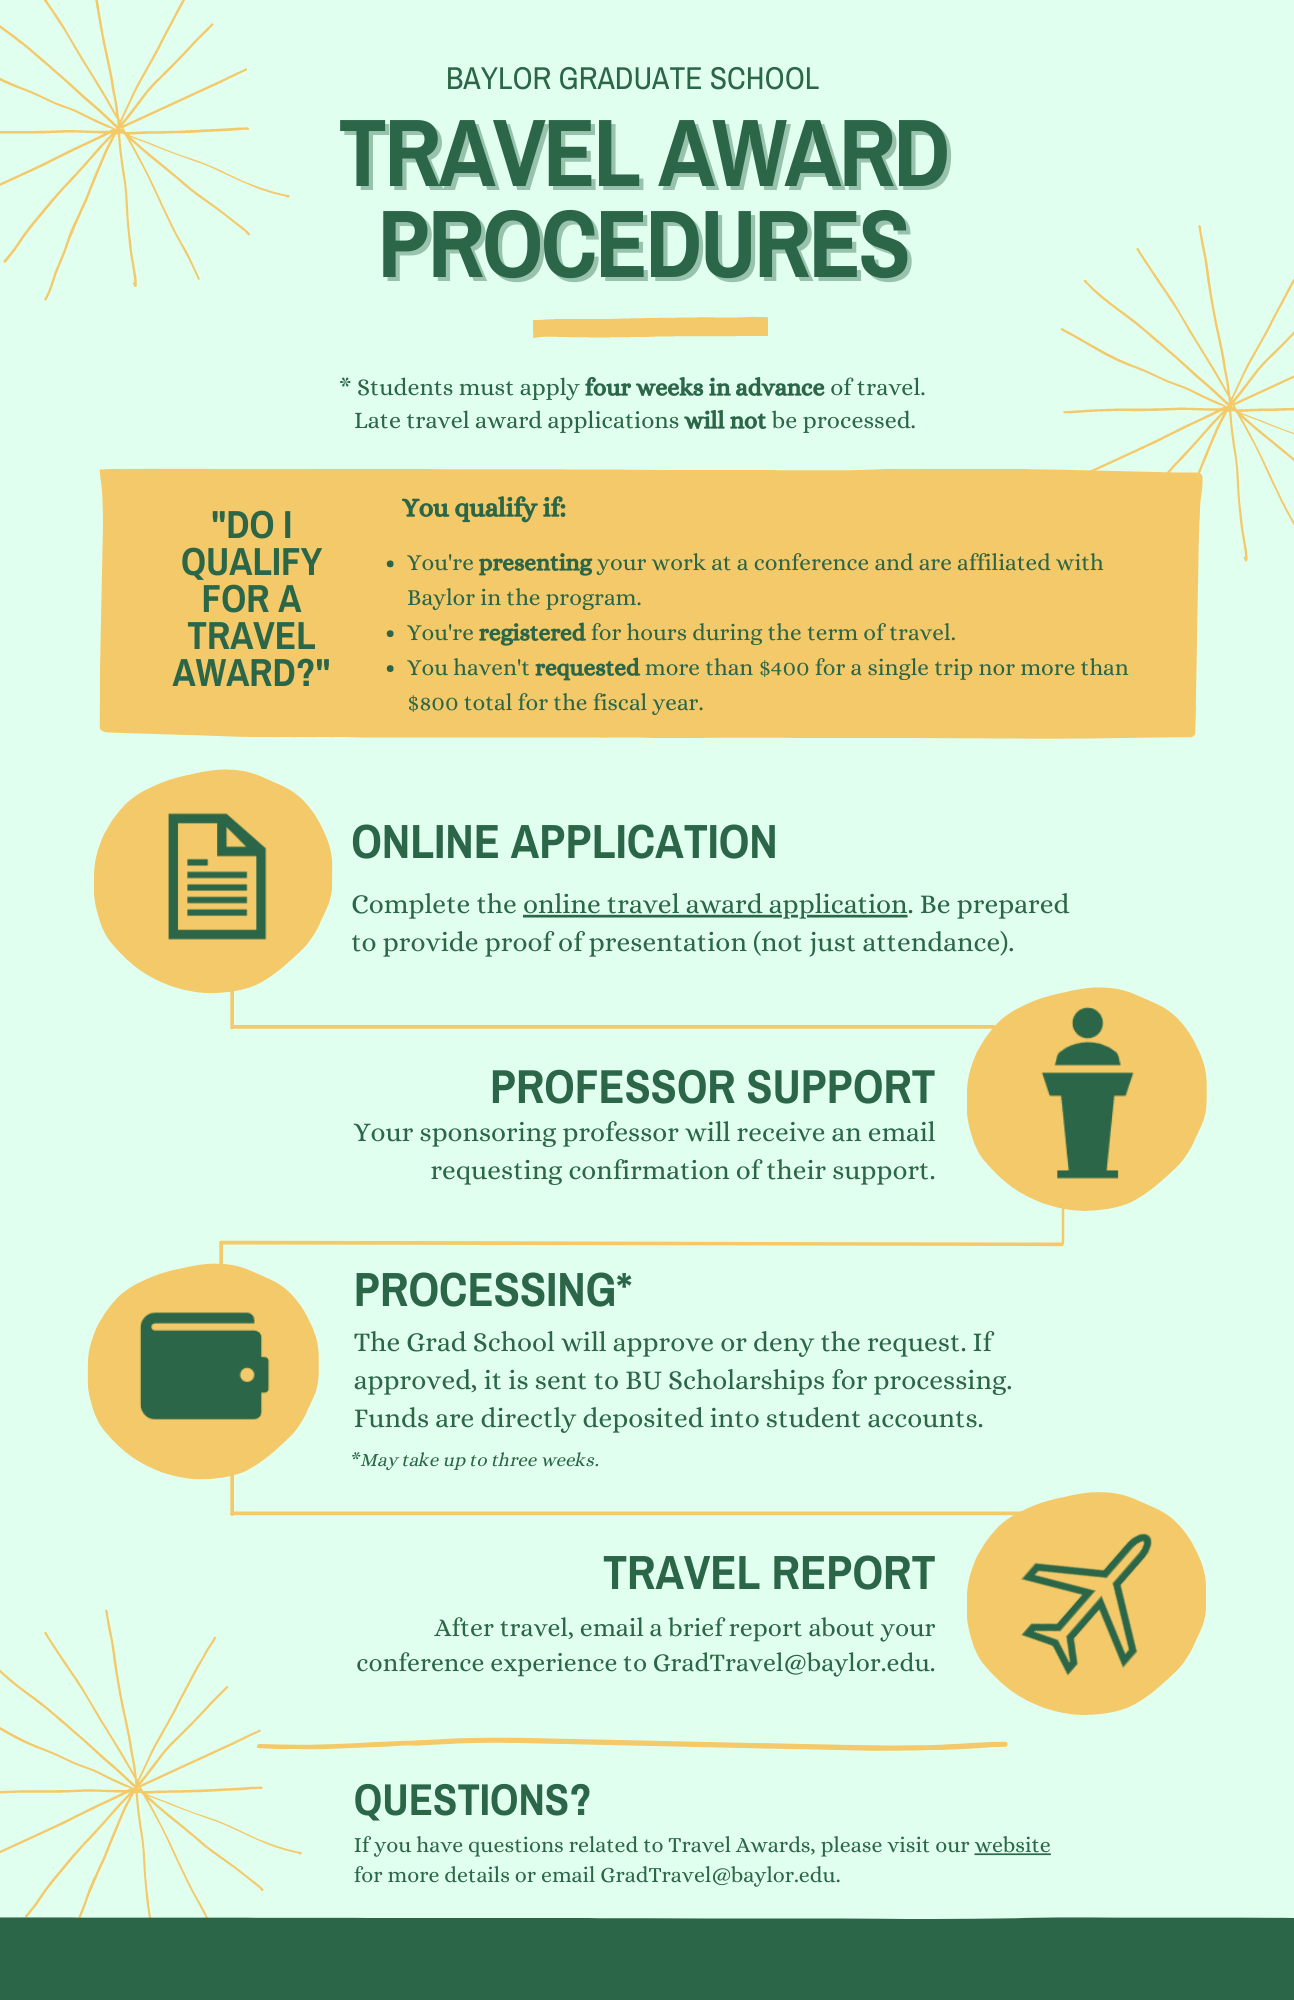 Baylor Graduate School Travel Award Procedures. As of January 1, 2023, travel award applications submitted after the time of travel will not be processed. Please apply four weeks in advance of travel.   “Do I Qualify for a Travel Award?” you qualify if: You are presenting your work at a conference and are affiliated with Baylor in the program. You’re registered for hours during the term of travel. You haven’t requested more than $400 for a single trip nor more than $800 total for the fiscal year.  Online Application: complete the online travel award application. Be prepared to provide proof of presentation (not just attendance).  Professor Support: Your sponsoring professor will receive an email requesting confirmation of their support.   Processing: The Grad School will approve or deny the request. If approved, it is sent to BU Scholarships for processing. Funds are directly deposited into student accounts. *May take up to three weeks  Travel Report: After travel, email a brief report about your conference experience to GradTravel@baylor.edu.   Questions? If you have questions related to Travel Awards, please visit our website for more details or email GradTravel@baylor.edu.